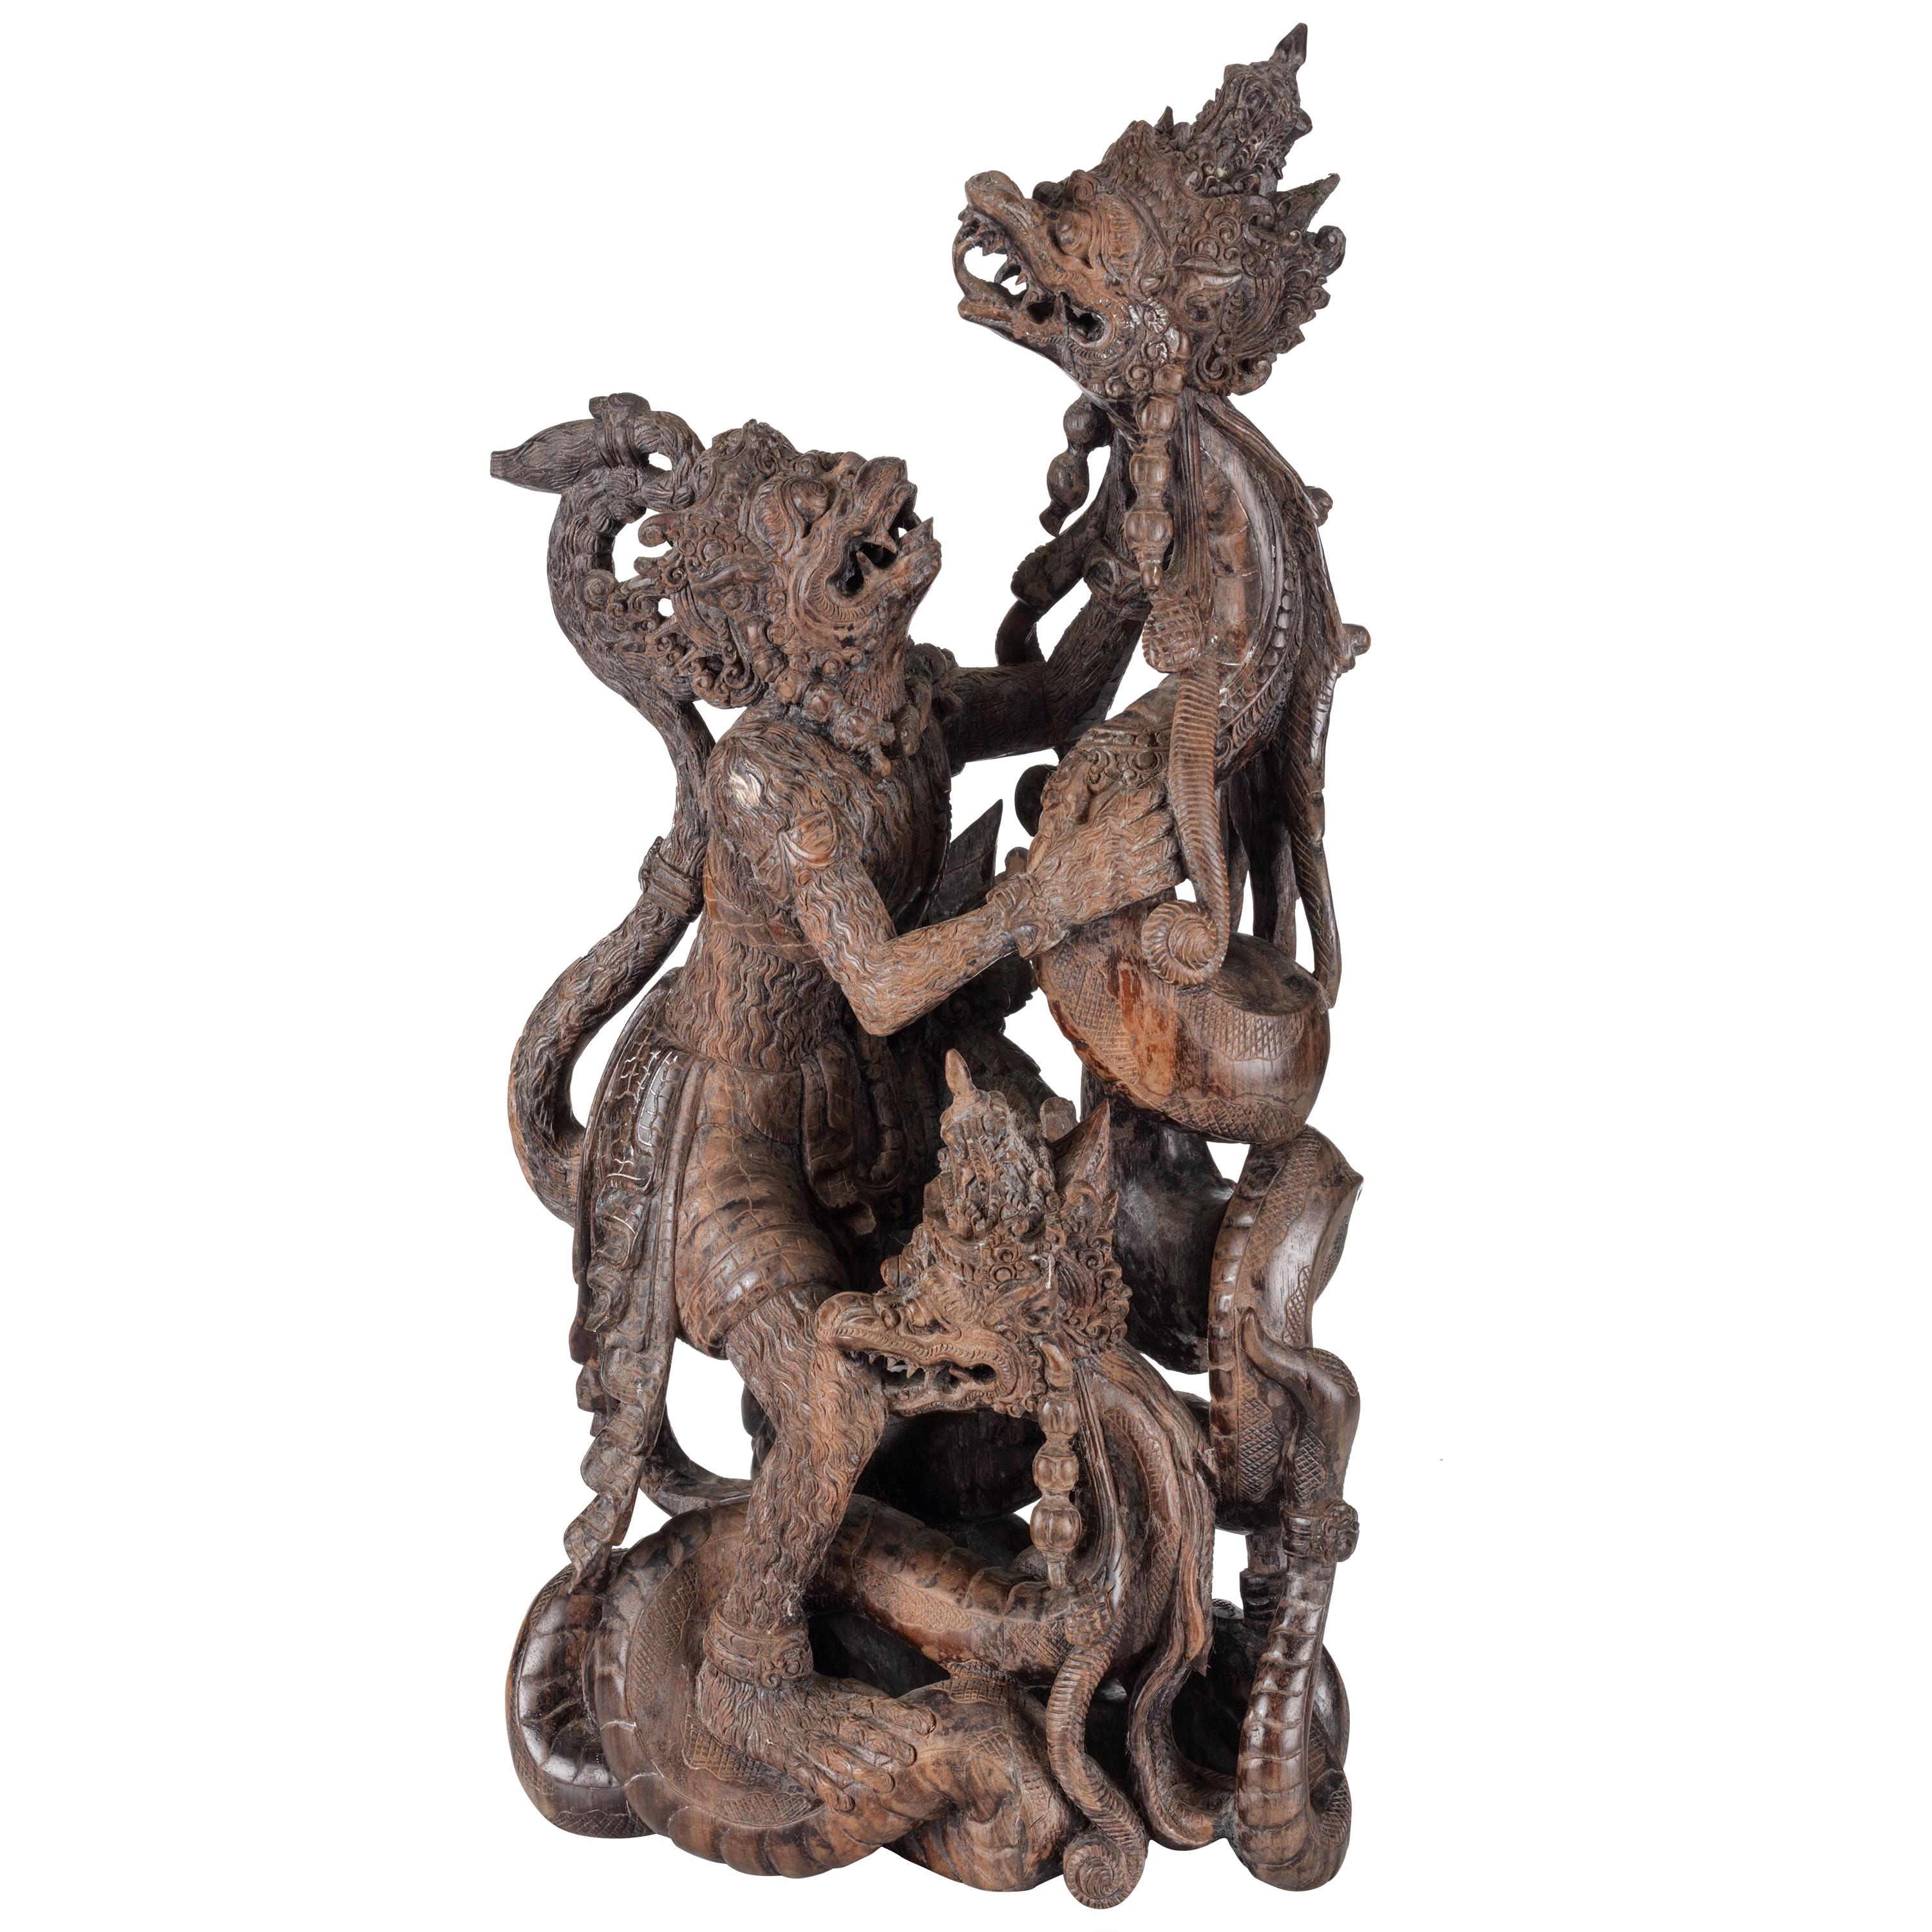 Very Fine and Detailed Balinese Sugarwood Sculpture of a Ramayana Scene